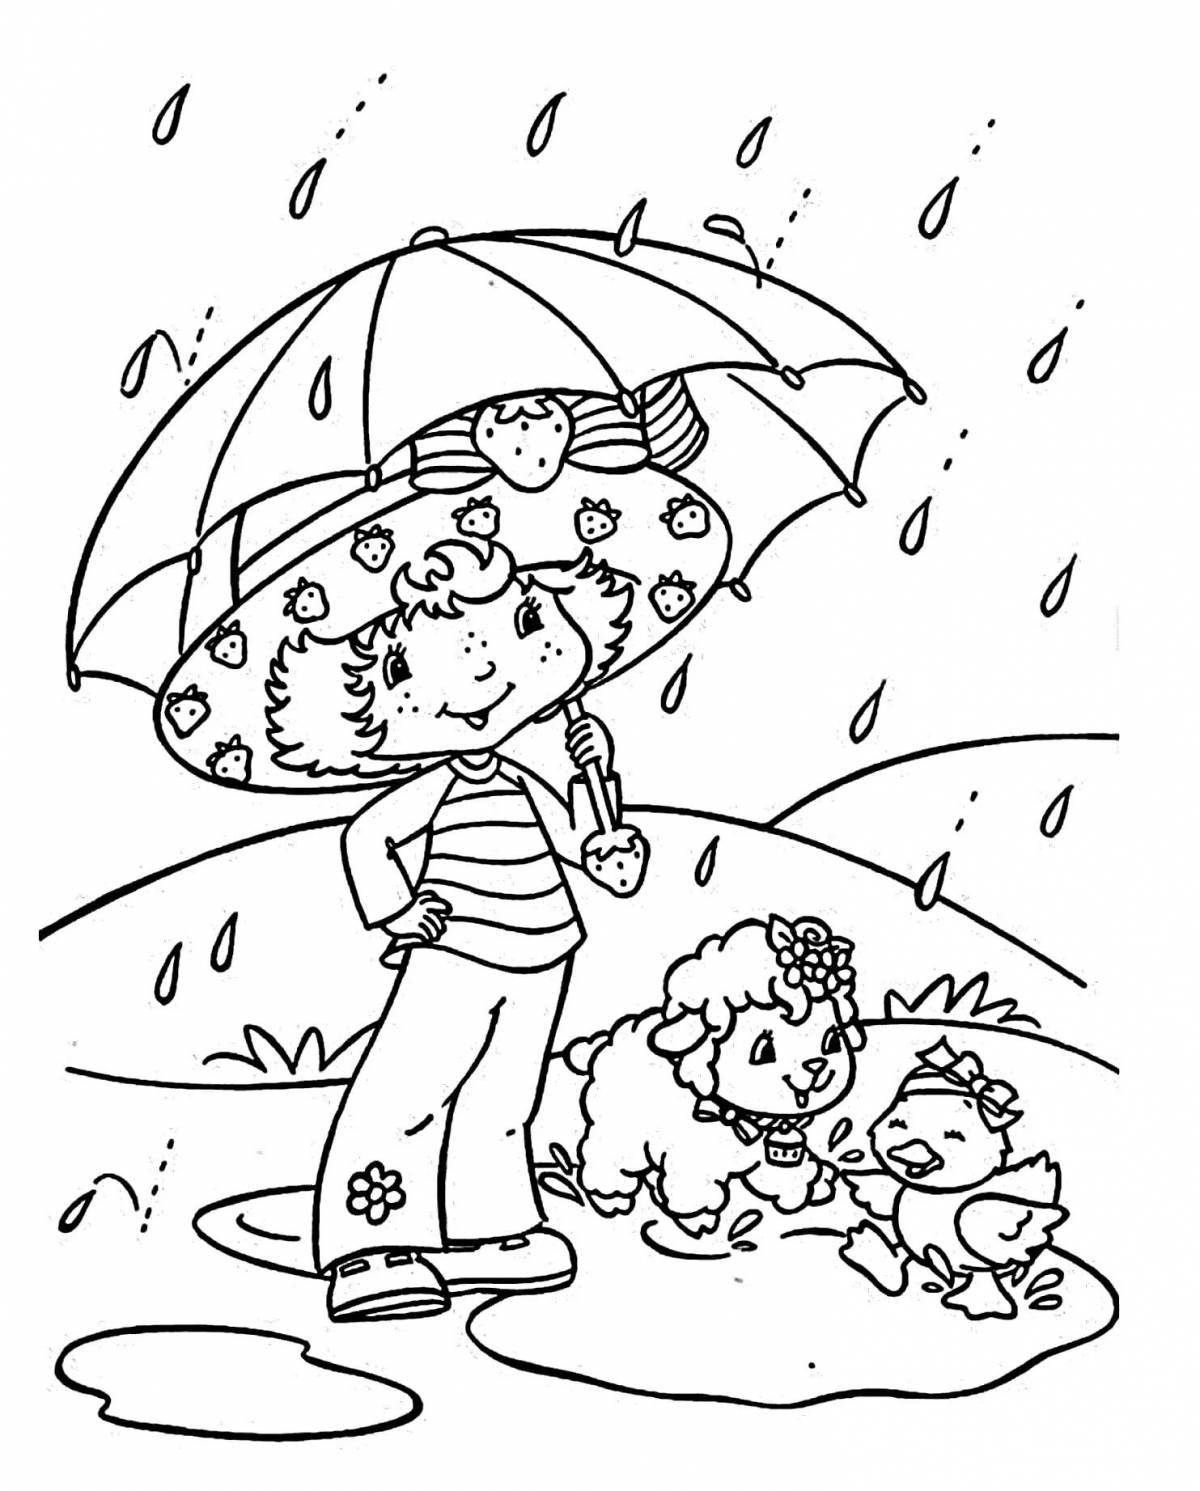 Gorgeous rain coloring for kids